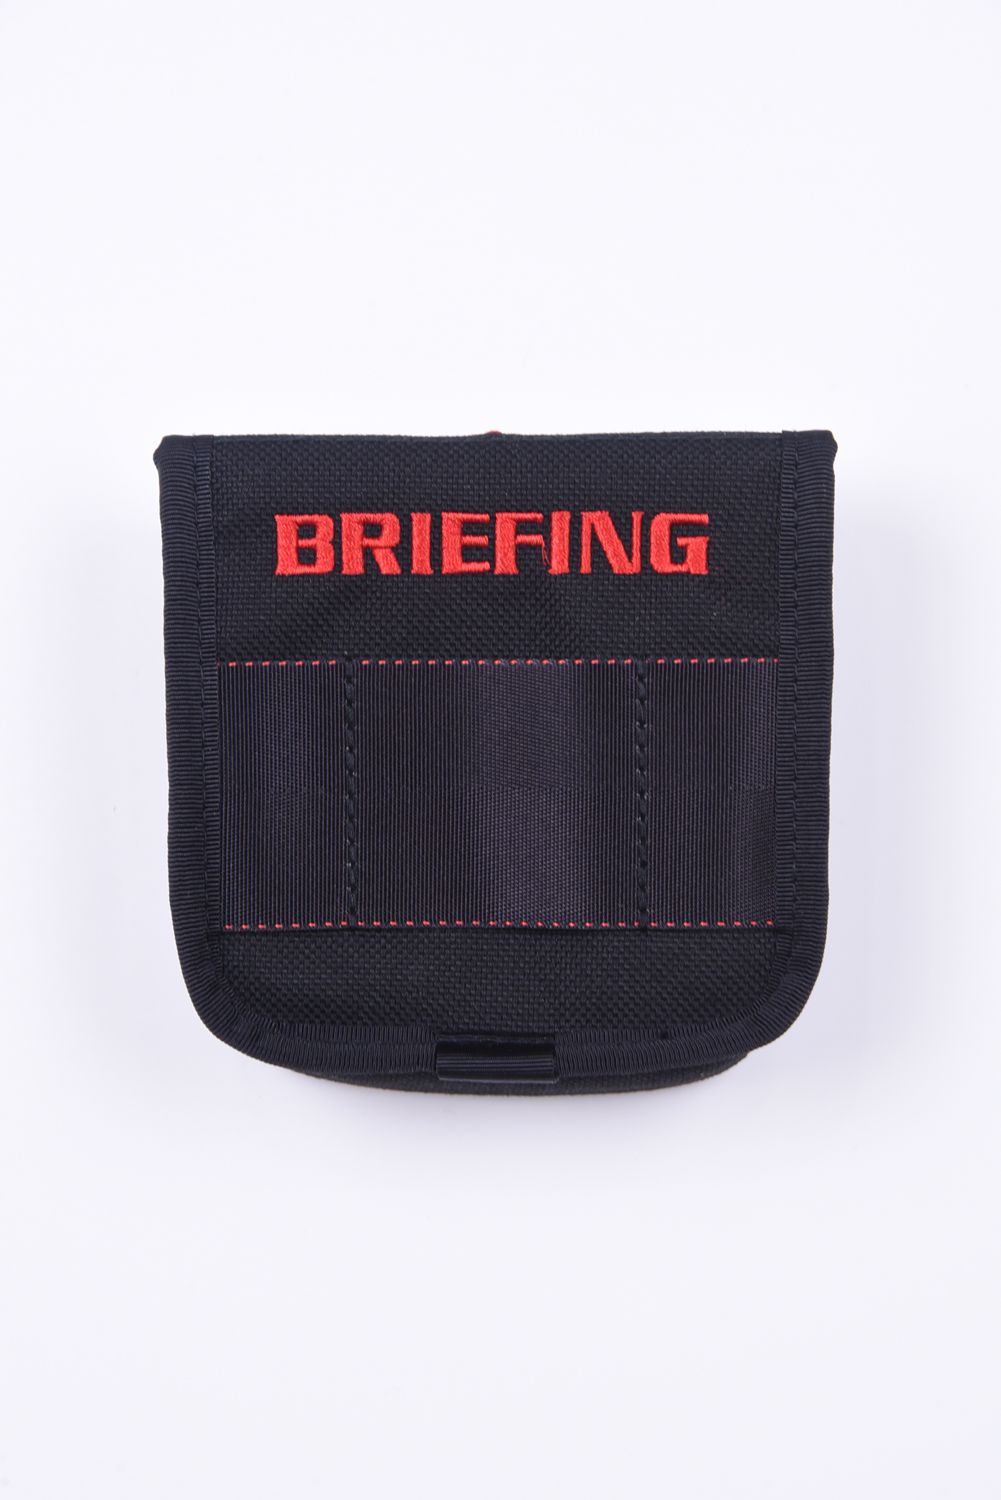 BRIEFING - 【STANDARD SERIES】 MALLET PUTTER COVER TL / マレット 